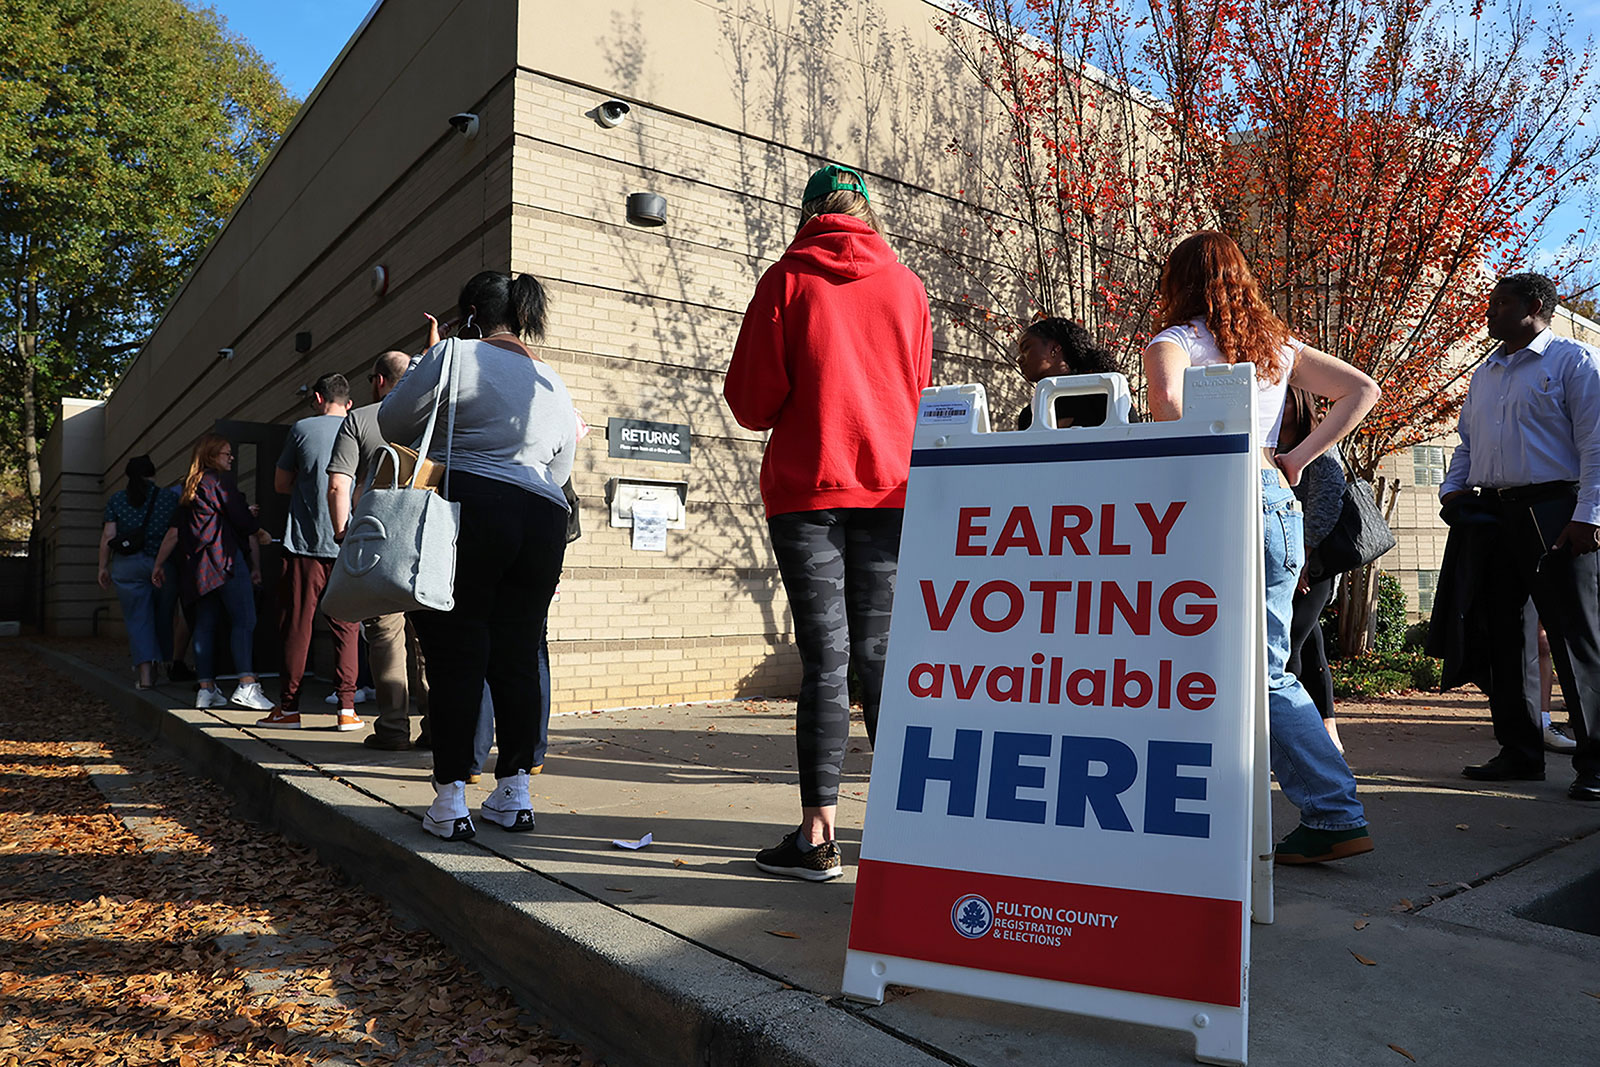 People wait in line for early voting on November 4, in Atlanta.